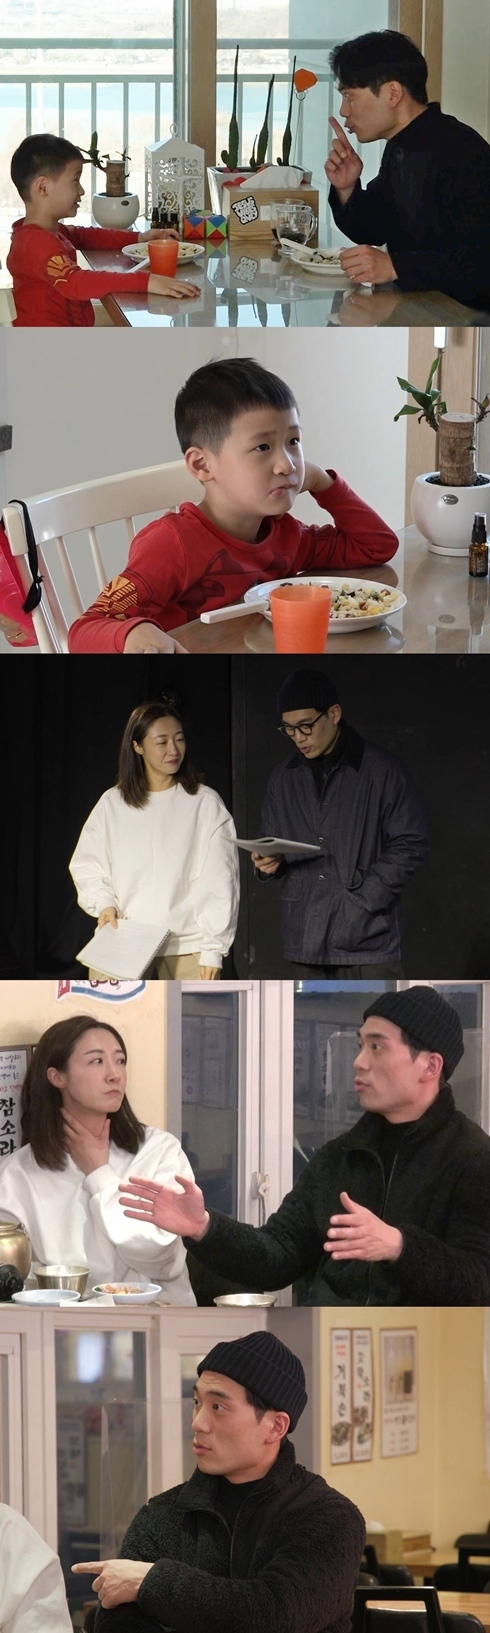 Actor Ahn Chang-hwan reveals why he decided to marriage his money-free debut debut wife, actor Jang hee-jung.On February 7, at 10:30 pm, SBS Same Bed, Different Dreams 2: You Are My Dest - You Are My Destiny reveals the cute deviation of Ahn Chang-hwan and his son Daoli.A suspicious move was captured at the couples house, Ahn Chang-hwan jang hee-jung.Ahn Chang-hwan handed cider to son Daoli secretly after seeking health food jang hee-jungDaoli laughed at the unthinkable sip of cider and showed a pure reaction.Ahn Chang-hwan suggested a bold departure, saying, It is a secret to my mother. Daoli was in the biggest crisis of his seven-year-old life.Daoli, who boasted of his usual force, said that he was applauded in the studio for his unexpected behavior for perfect crime.Daolis choice, which surprised everyone, attracts attention.In the meantime, Ahn Chang-hwan jang hee-jung and his wife visited Daehangno where they remembered their memories.The couple became a hot topic in 2011 when they met in a play and raised love.Jang hee-jung confessed that he had a kissing scene, saying that he was the main character with actor Park Hae-soo at the time.Even Ahn Chang-hwan focused his attention on the funny reason why he had to watch the kissing god even though he was in love with Jang hee-jung.The studio also raises questions about the fact that it is deeply immersed in the story of the two people, saying, What do you do and I am not jealous?Ahn Chang-hwan also recalled the moment when he decided to marriage his wife, Jang hee-jung.Ahn Chang-hwan said, I was worried about money, I was worried about my house, and I felt like I was hit by a neck in a word (in my wifes words), and the MCs who watched me agreed that it is cool and it starts like that.One word of jang hee-jung that impressed everyone raises curiosity.On the 7th, You My Destiny will air at 10:30 p.m., which is earlier than before.